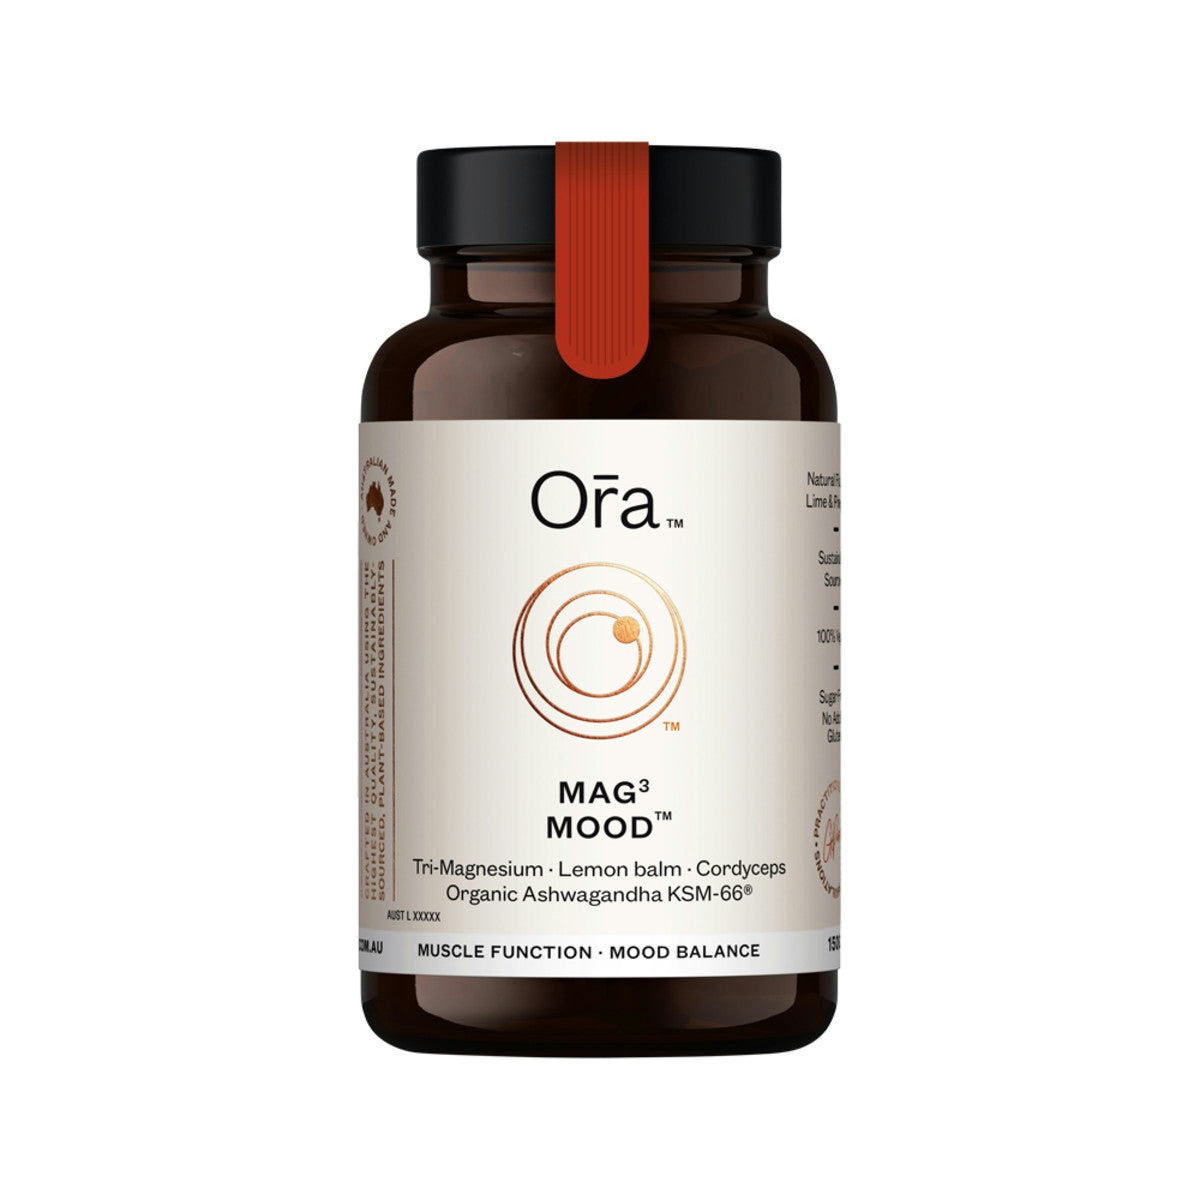 Image of Ora Mag Mood oral powder 150g with a white background